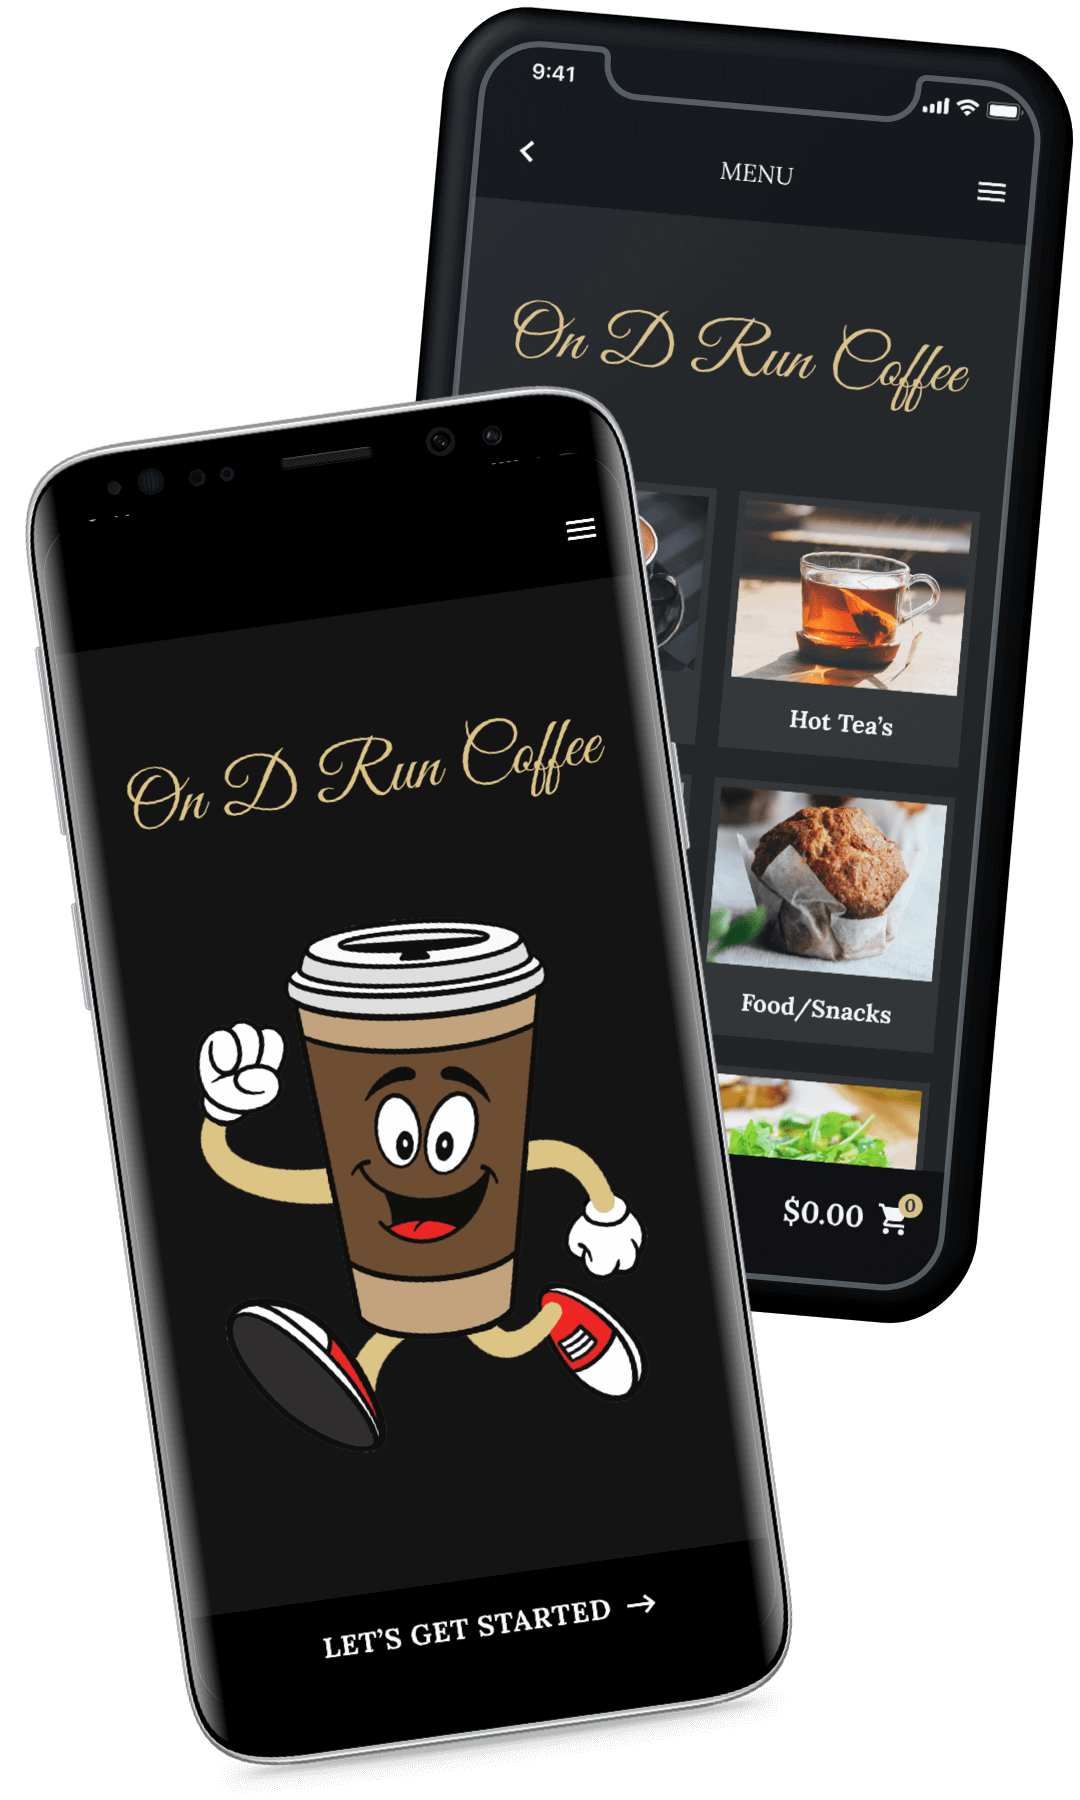 On D Run Coffee shown on two phones